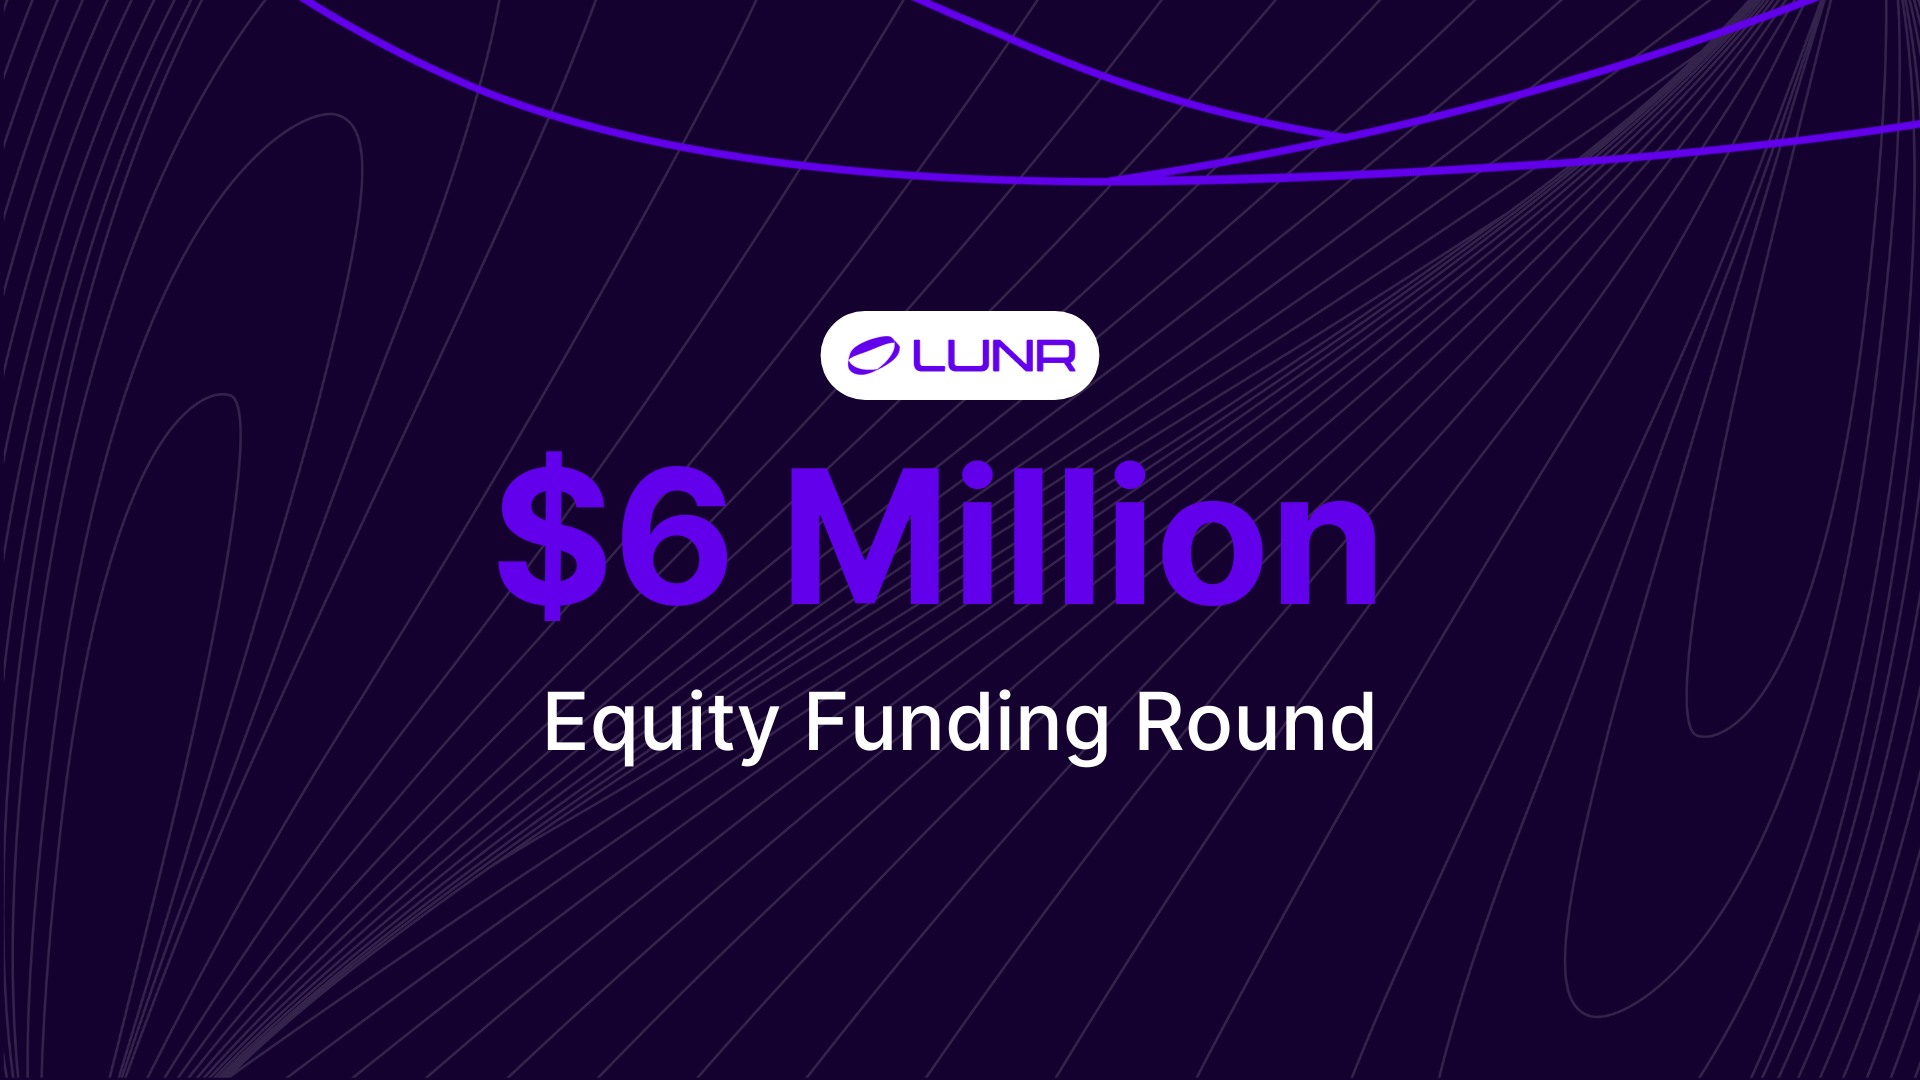 Lunr Equity Funding Round Blog Cover-1